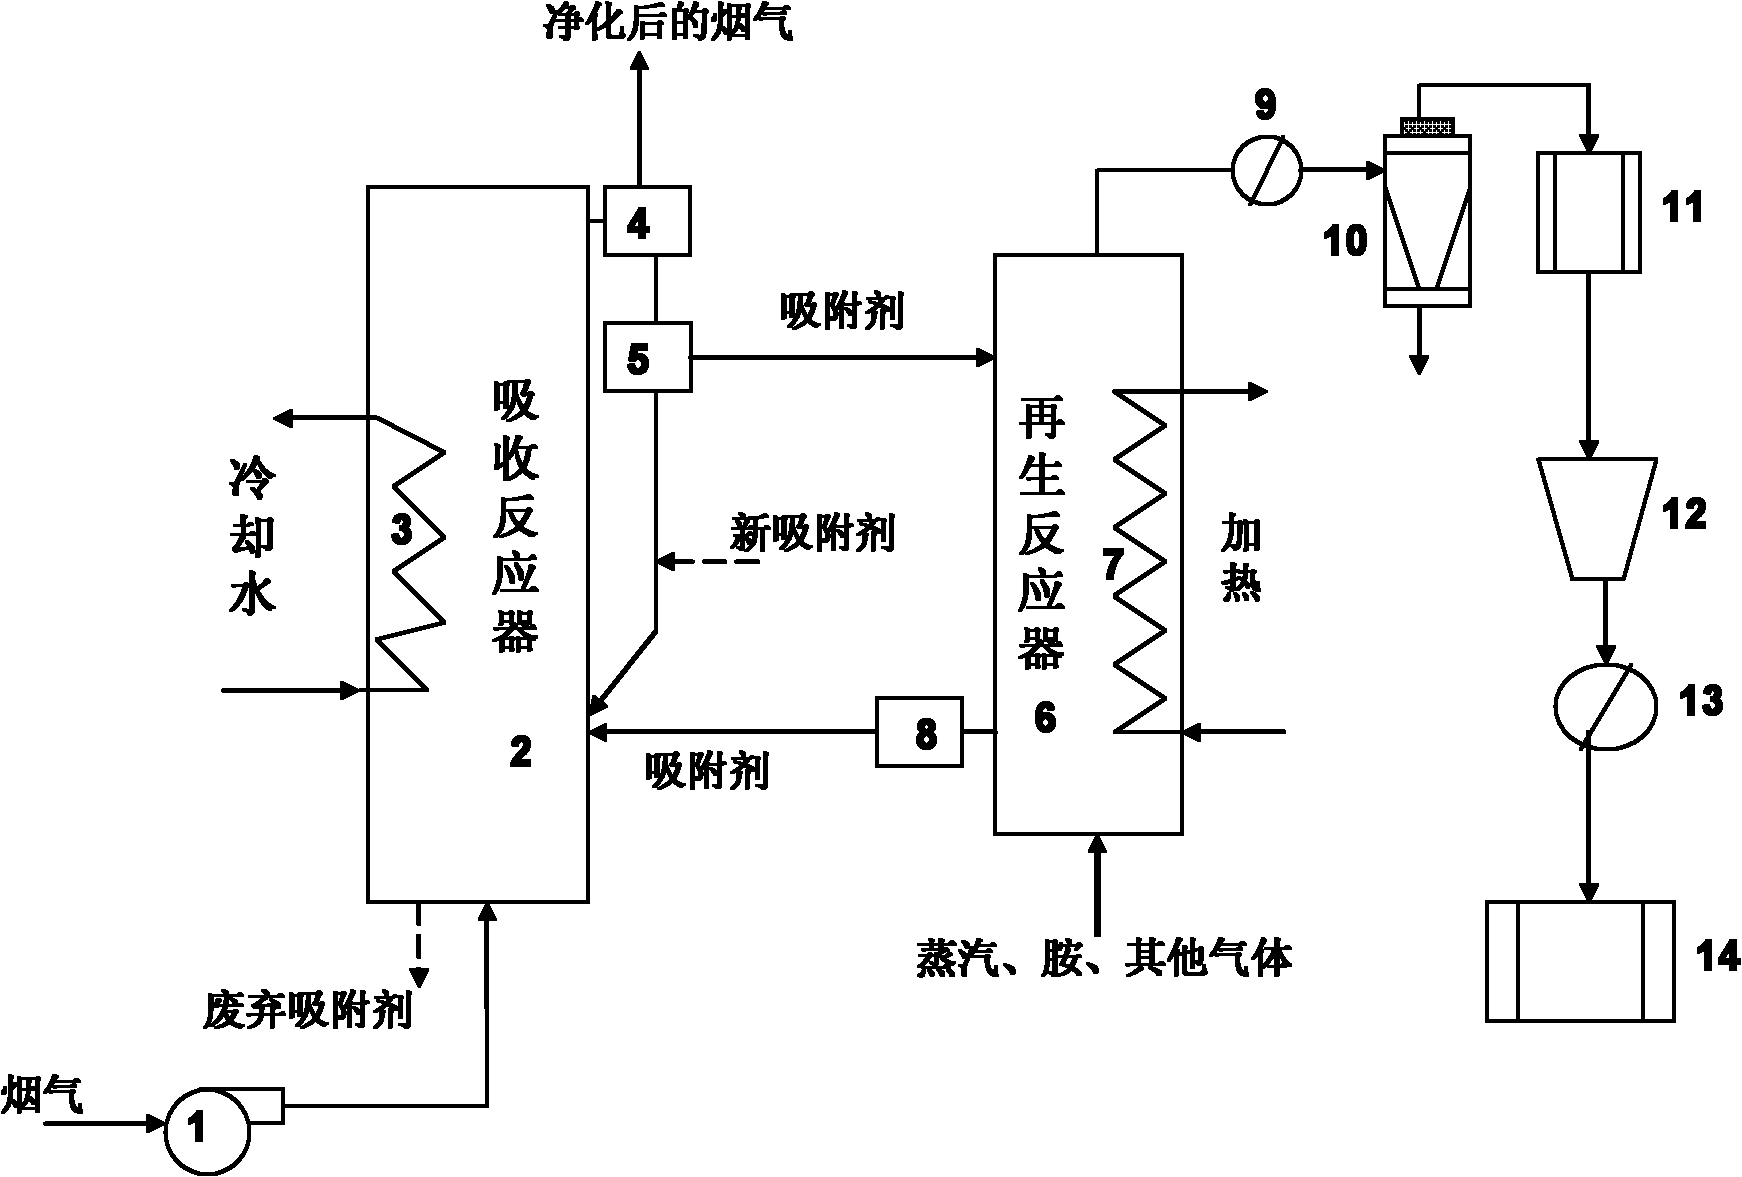 Process and equipment for removing CO2 in flue gas by utilizing amine solid adsorbent